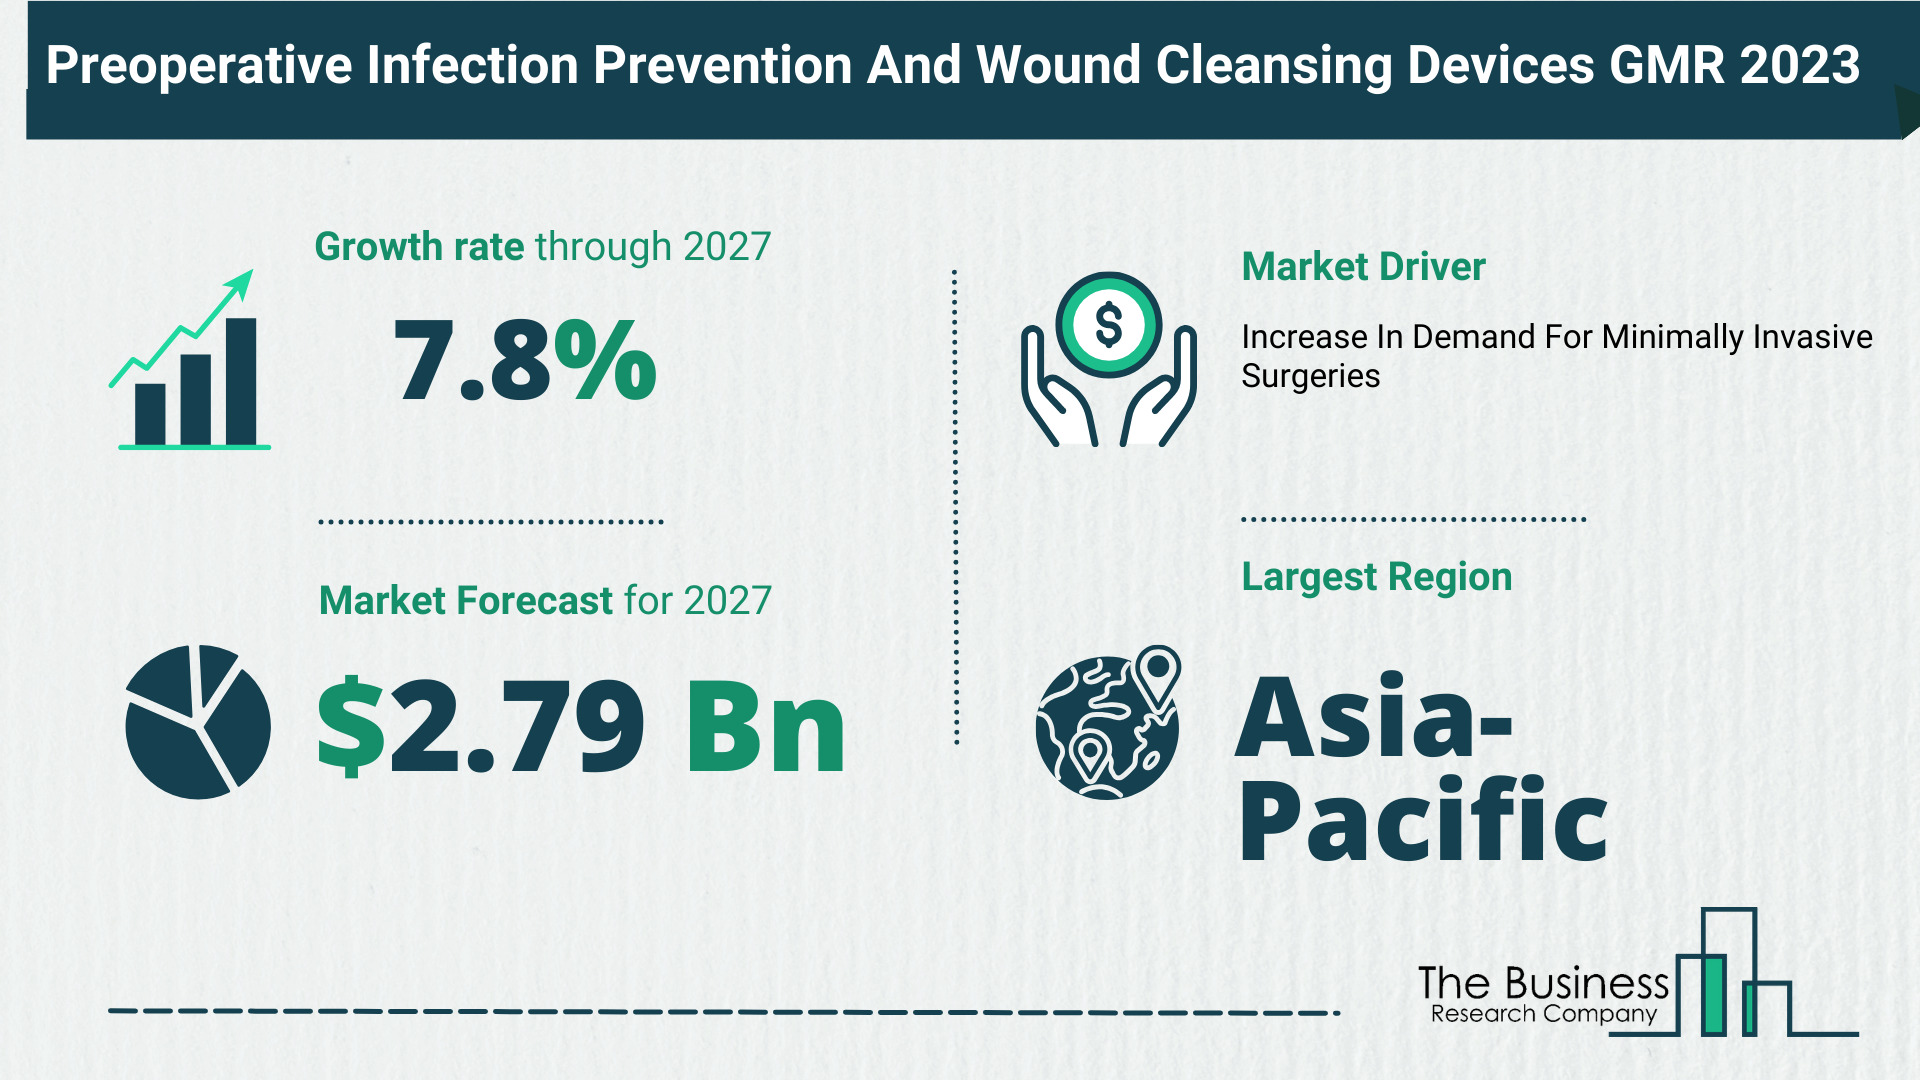 Preoperative Infection Prevention And Wound Cleansing Devices Market